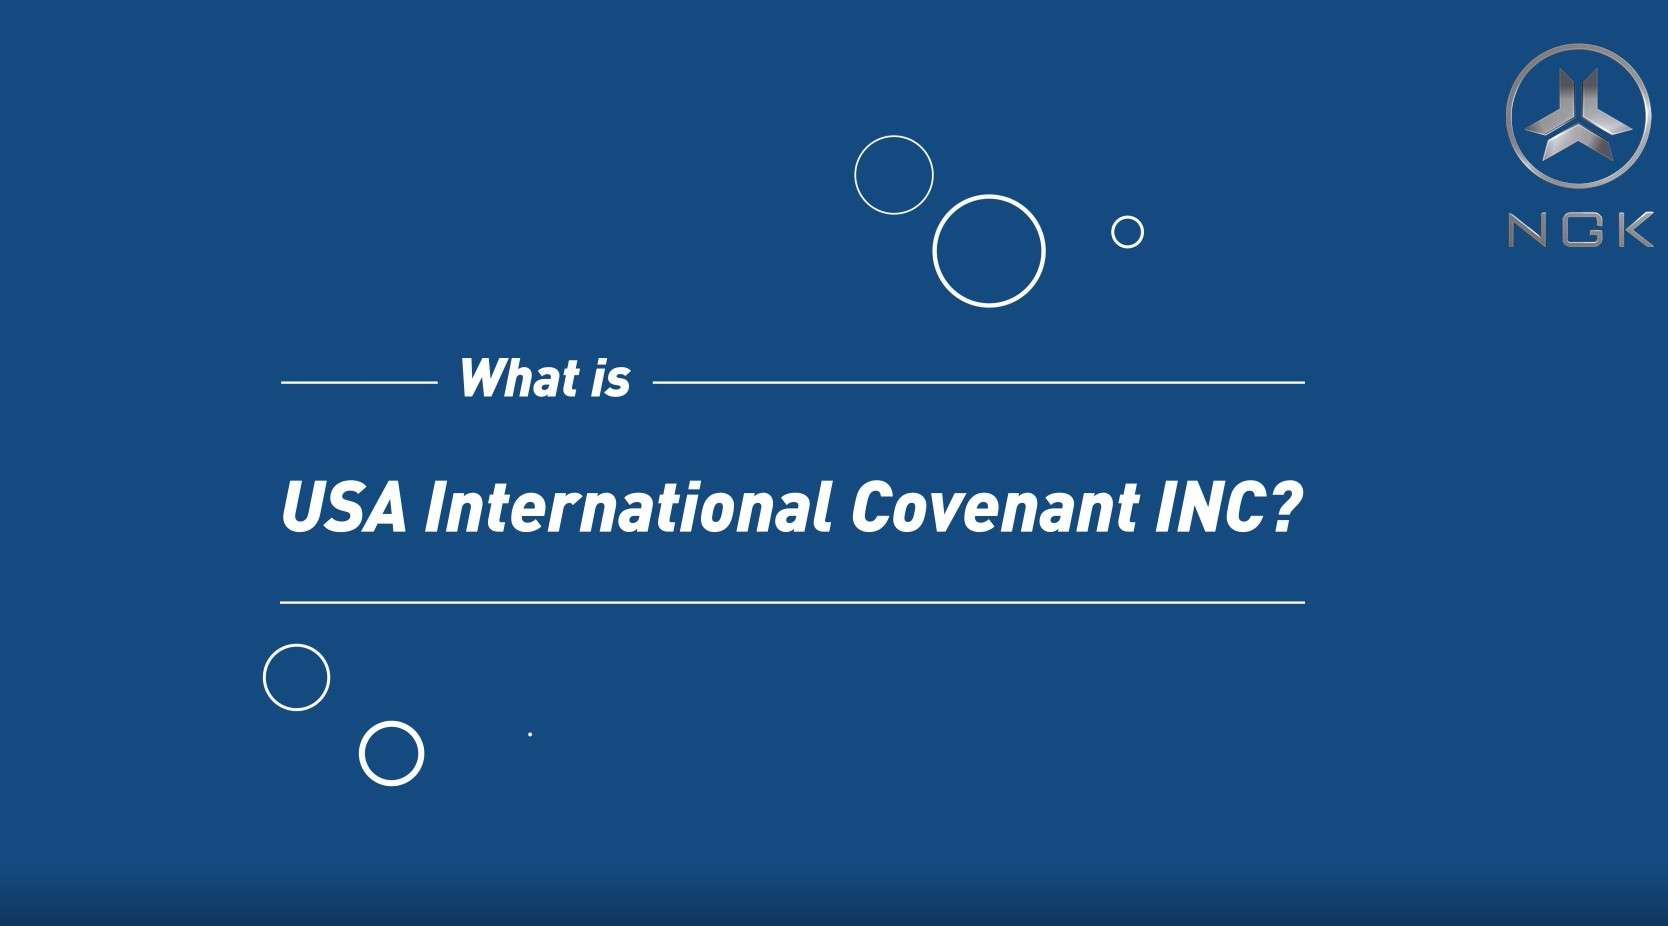 What is USA International Covenant INC?